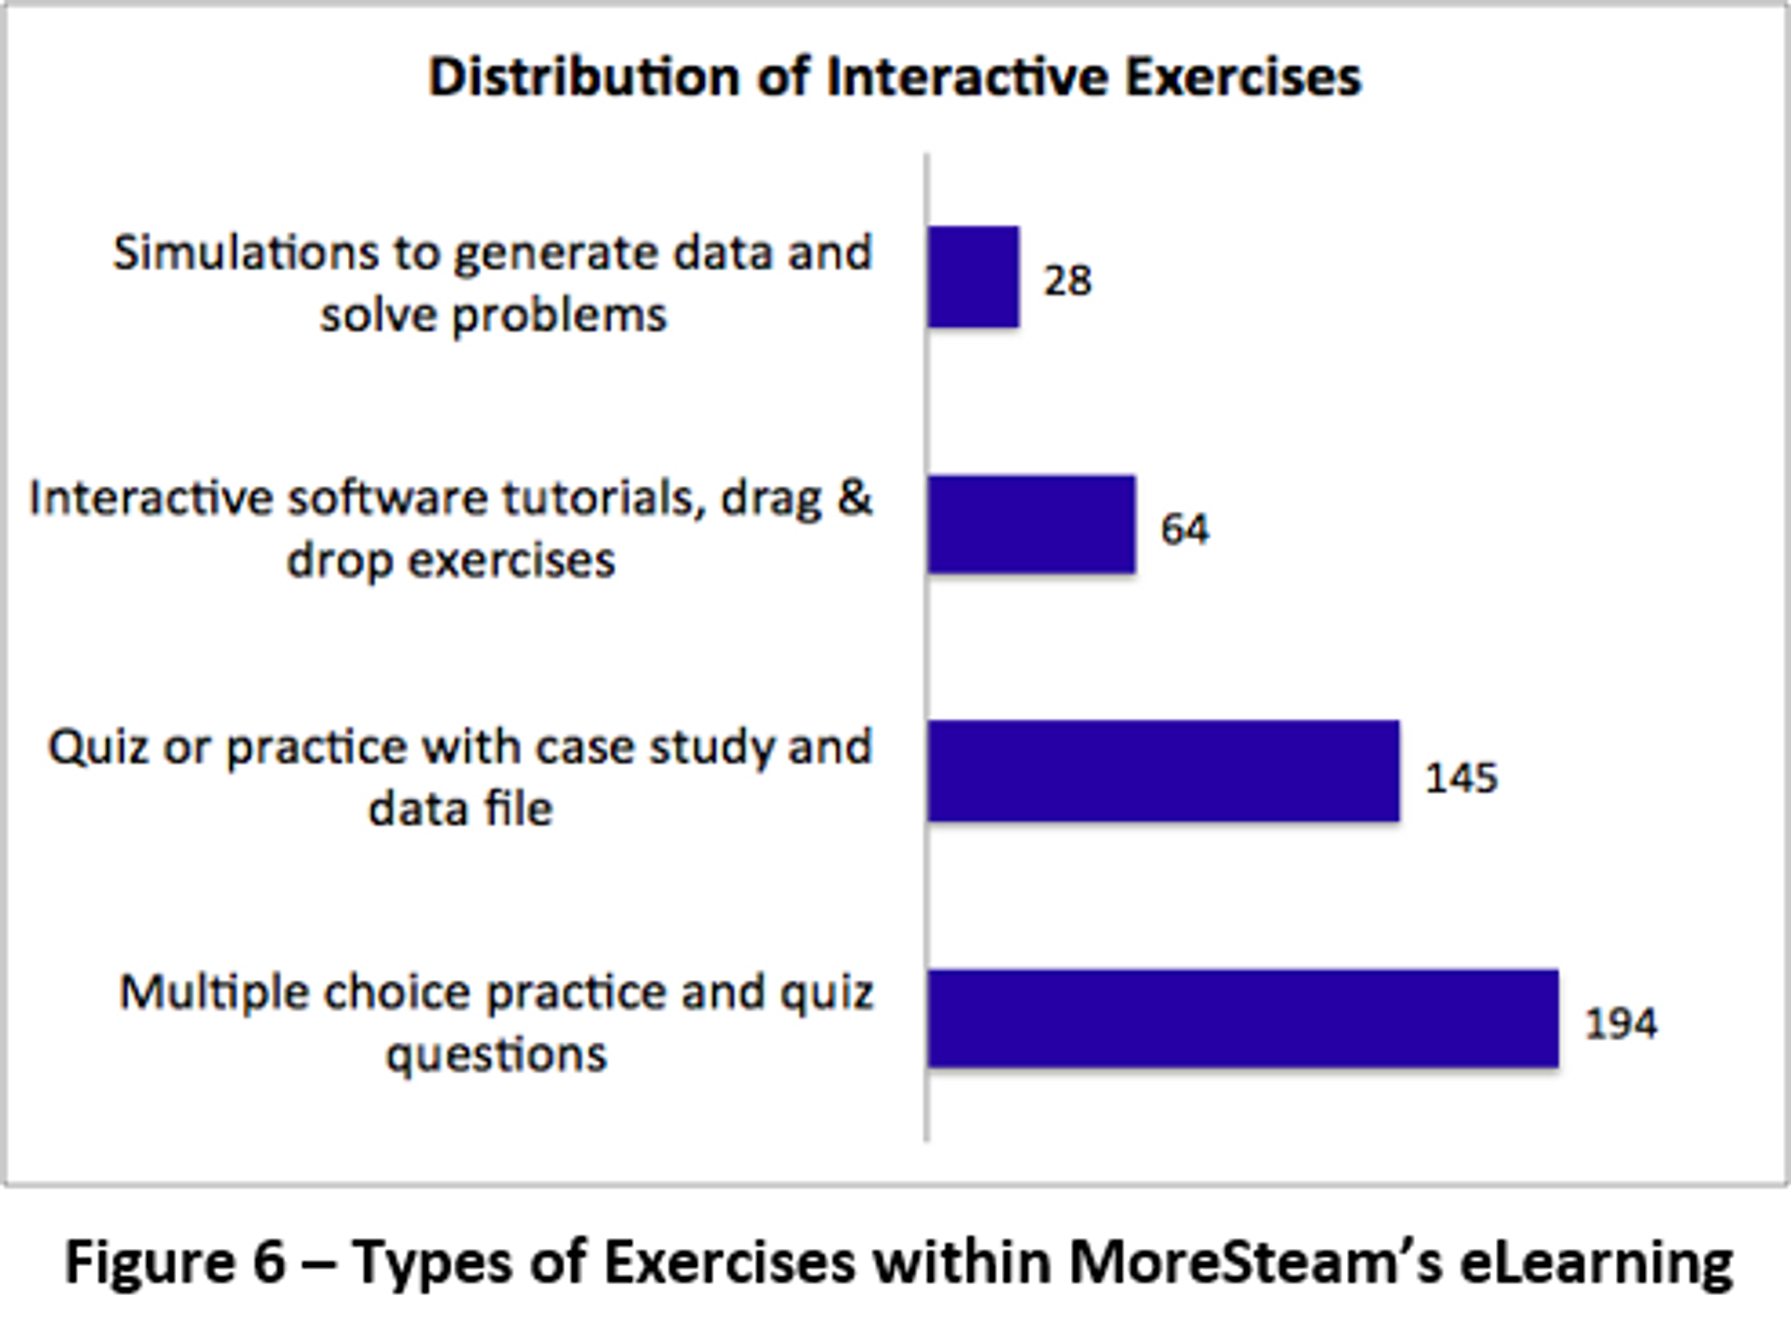 Multiple choice practice and quiz questions is the most common form of interactive exercise